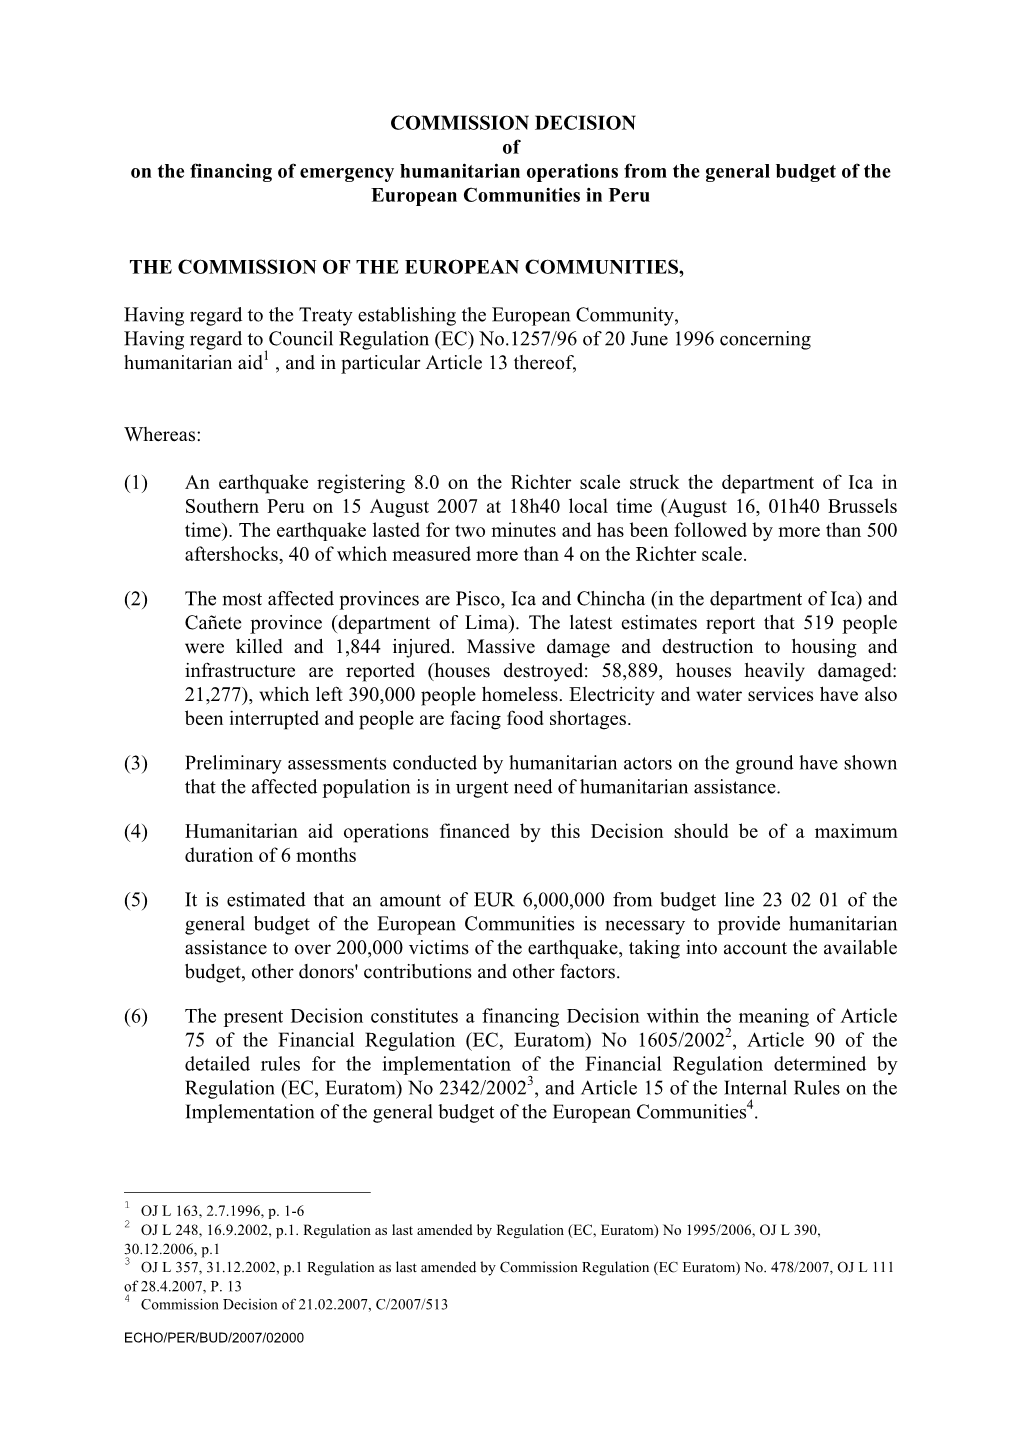 COMMISSION DECISION of on the Financing of Emergency Humanitarian Operations from the General Budget of the European Communities in Peru